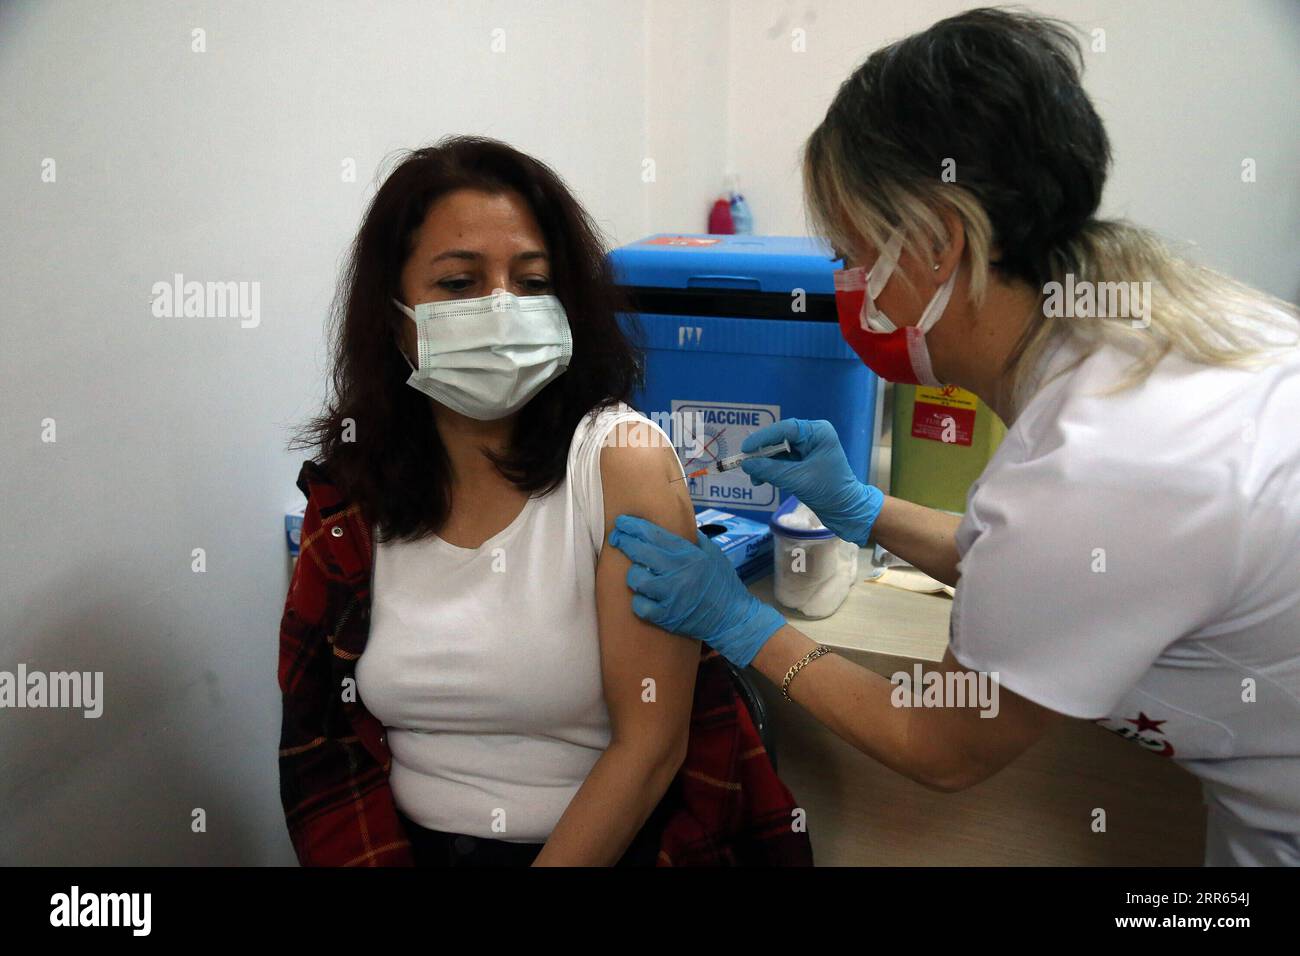 210126 -- ANKARA, Jan. 26, 2021 -- A woman receives a dose of the COVID-19 vaccine at a health center in Ankara, Turkey, on Jan. 26, 2021. Turkey reported on Tuesday 7,103 new COVID-19 cases, including 681 with symptoms, raising the total number in the country to 2,442,350. Photo by /Xinhua TURKEY-ANKARA-COVID-19-VACCINE MustafaxKaya PUBLICATIONxNOTxINxCHN Stock Photo